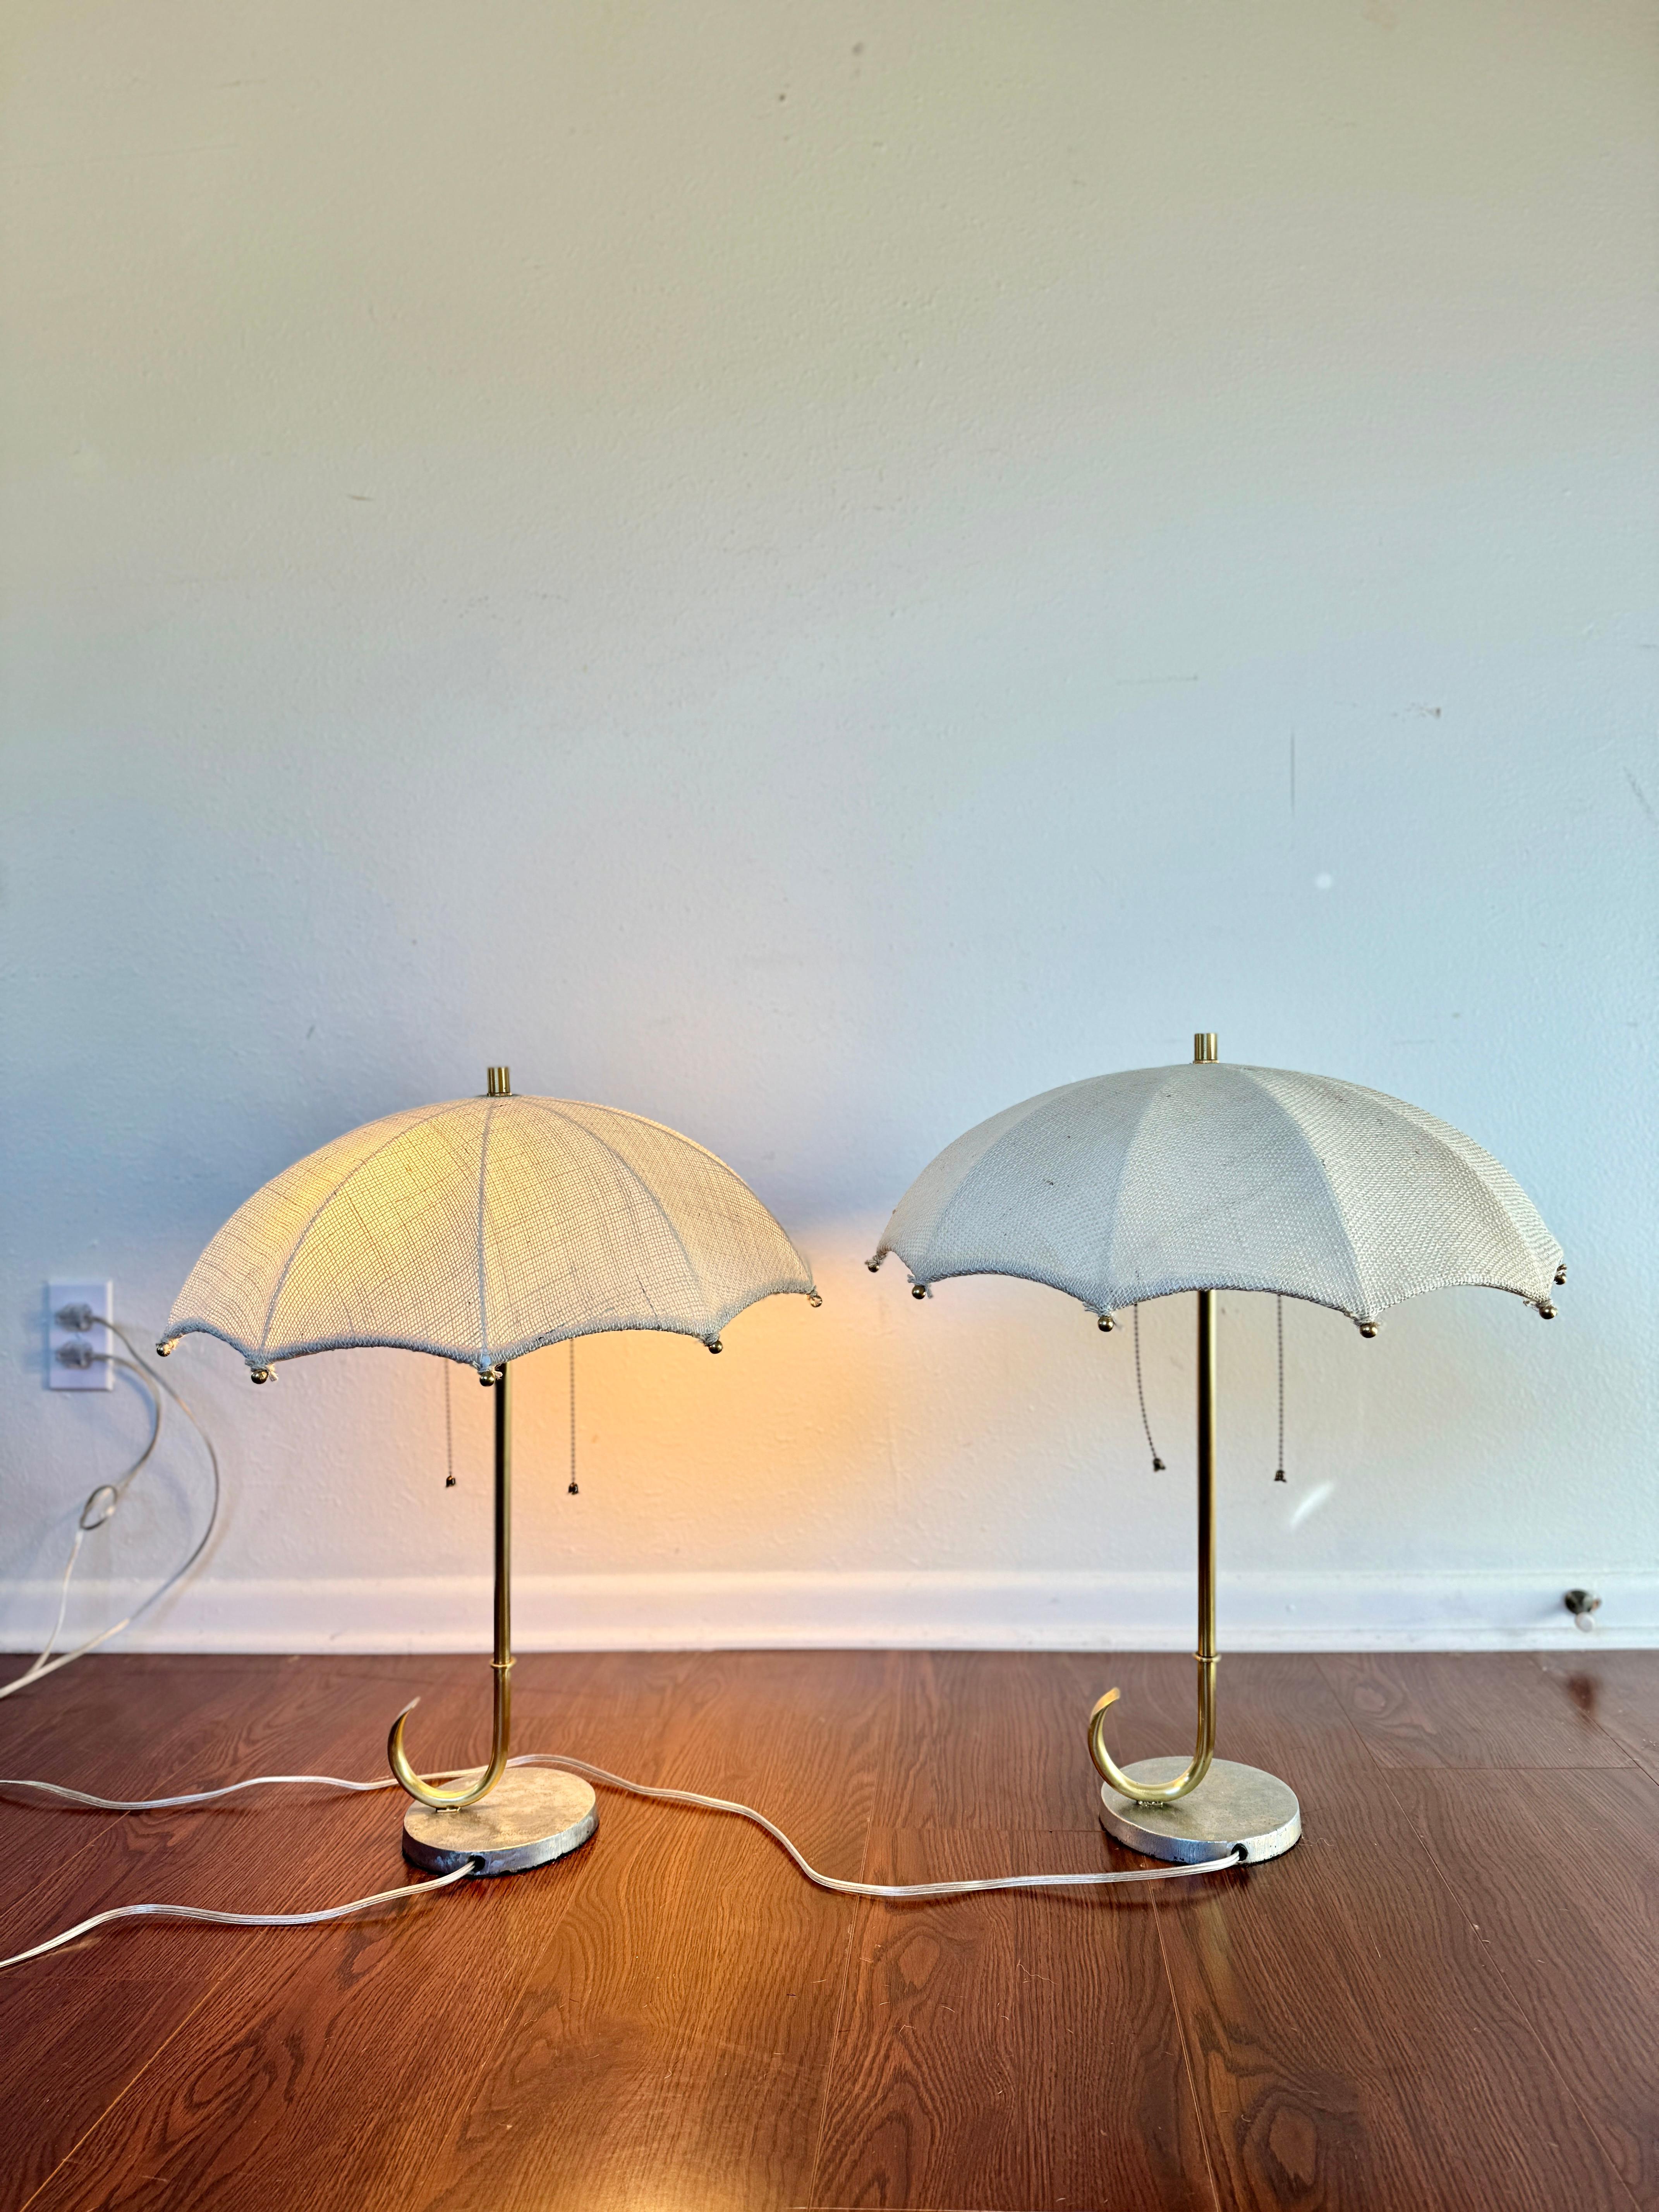 Pair of umbrella table lamps by Gilbert Rohde for Mutual Sunset lamp co 1930s For Sale 6